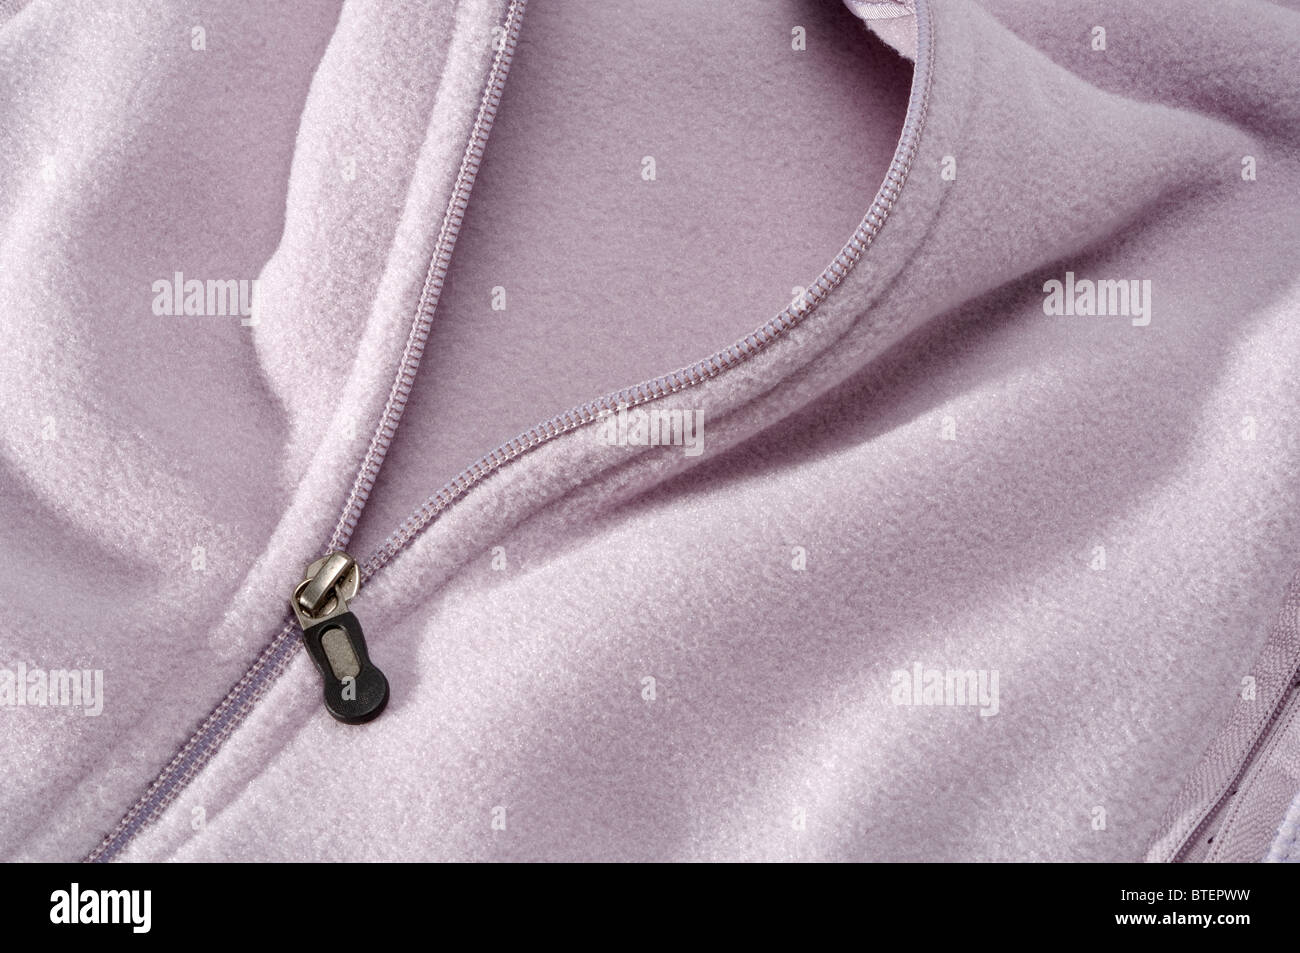 Close-up view of a pink pastel colored jacket and the zipper section opening Stock Photo